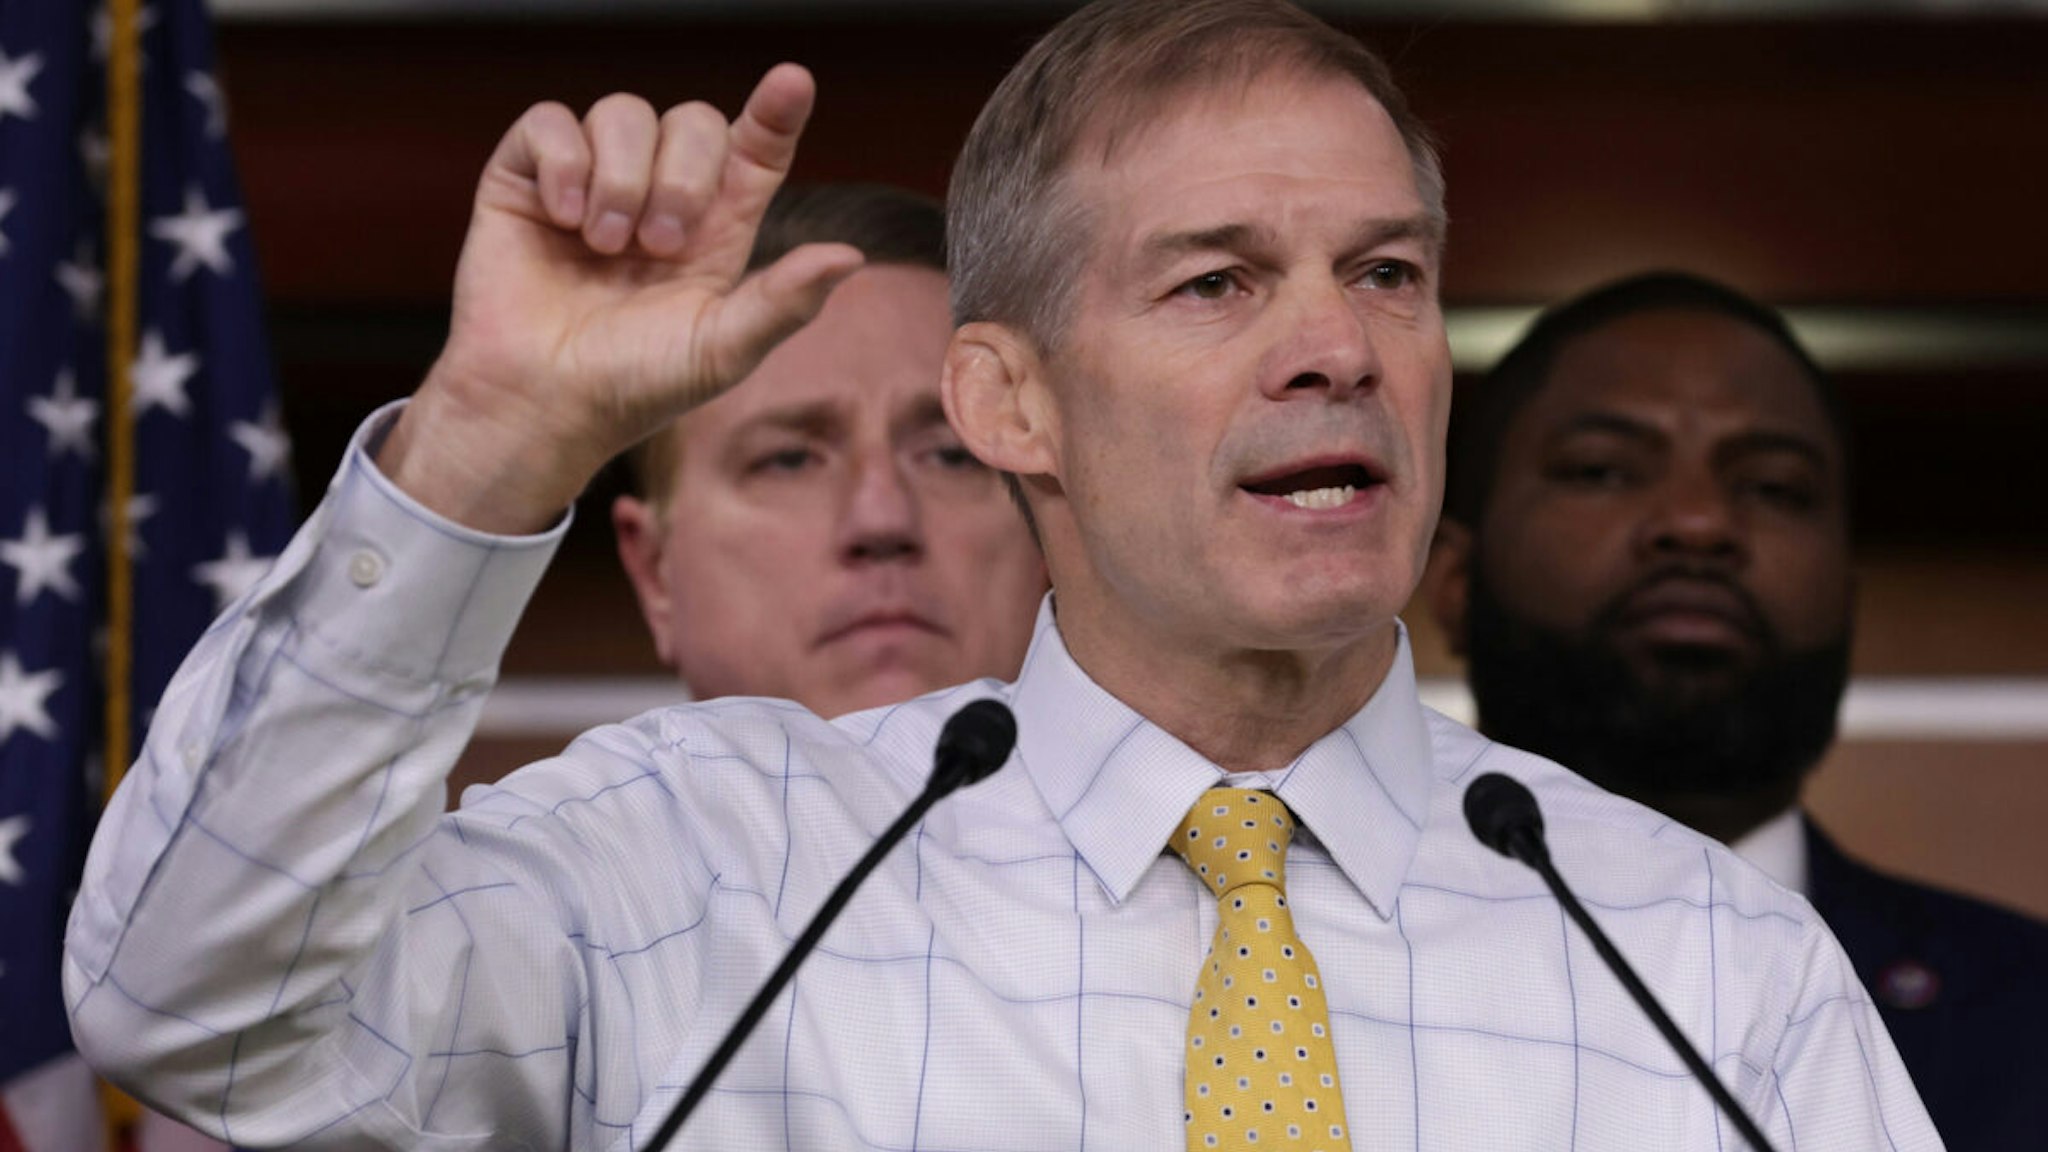 Flanked by House Republicans, U.S. Rep. Jim Jordan (R-OH) speaks during a news conference at the U.S. Capitol on November 17, 2022 in Washington, DC.